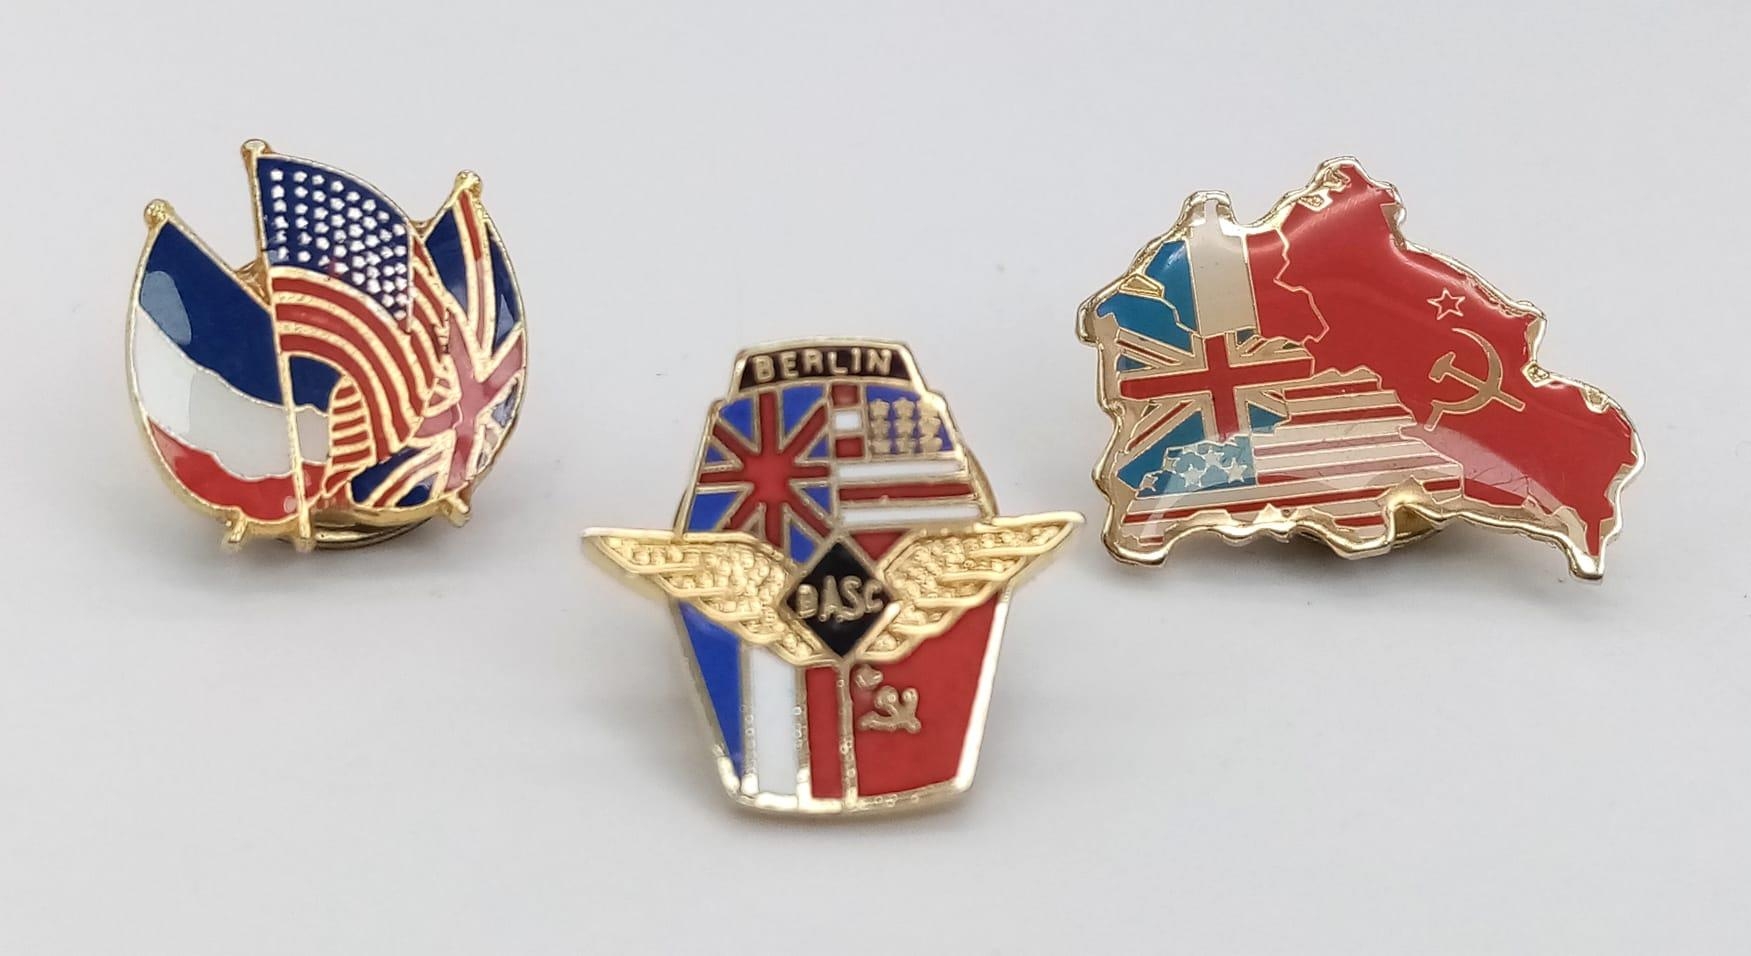 Three Miniature BASC (Berlin Air Safety Centre) Metal and Enamel Badges. In good condition.